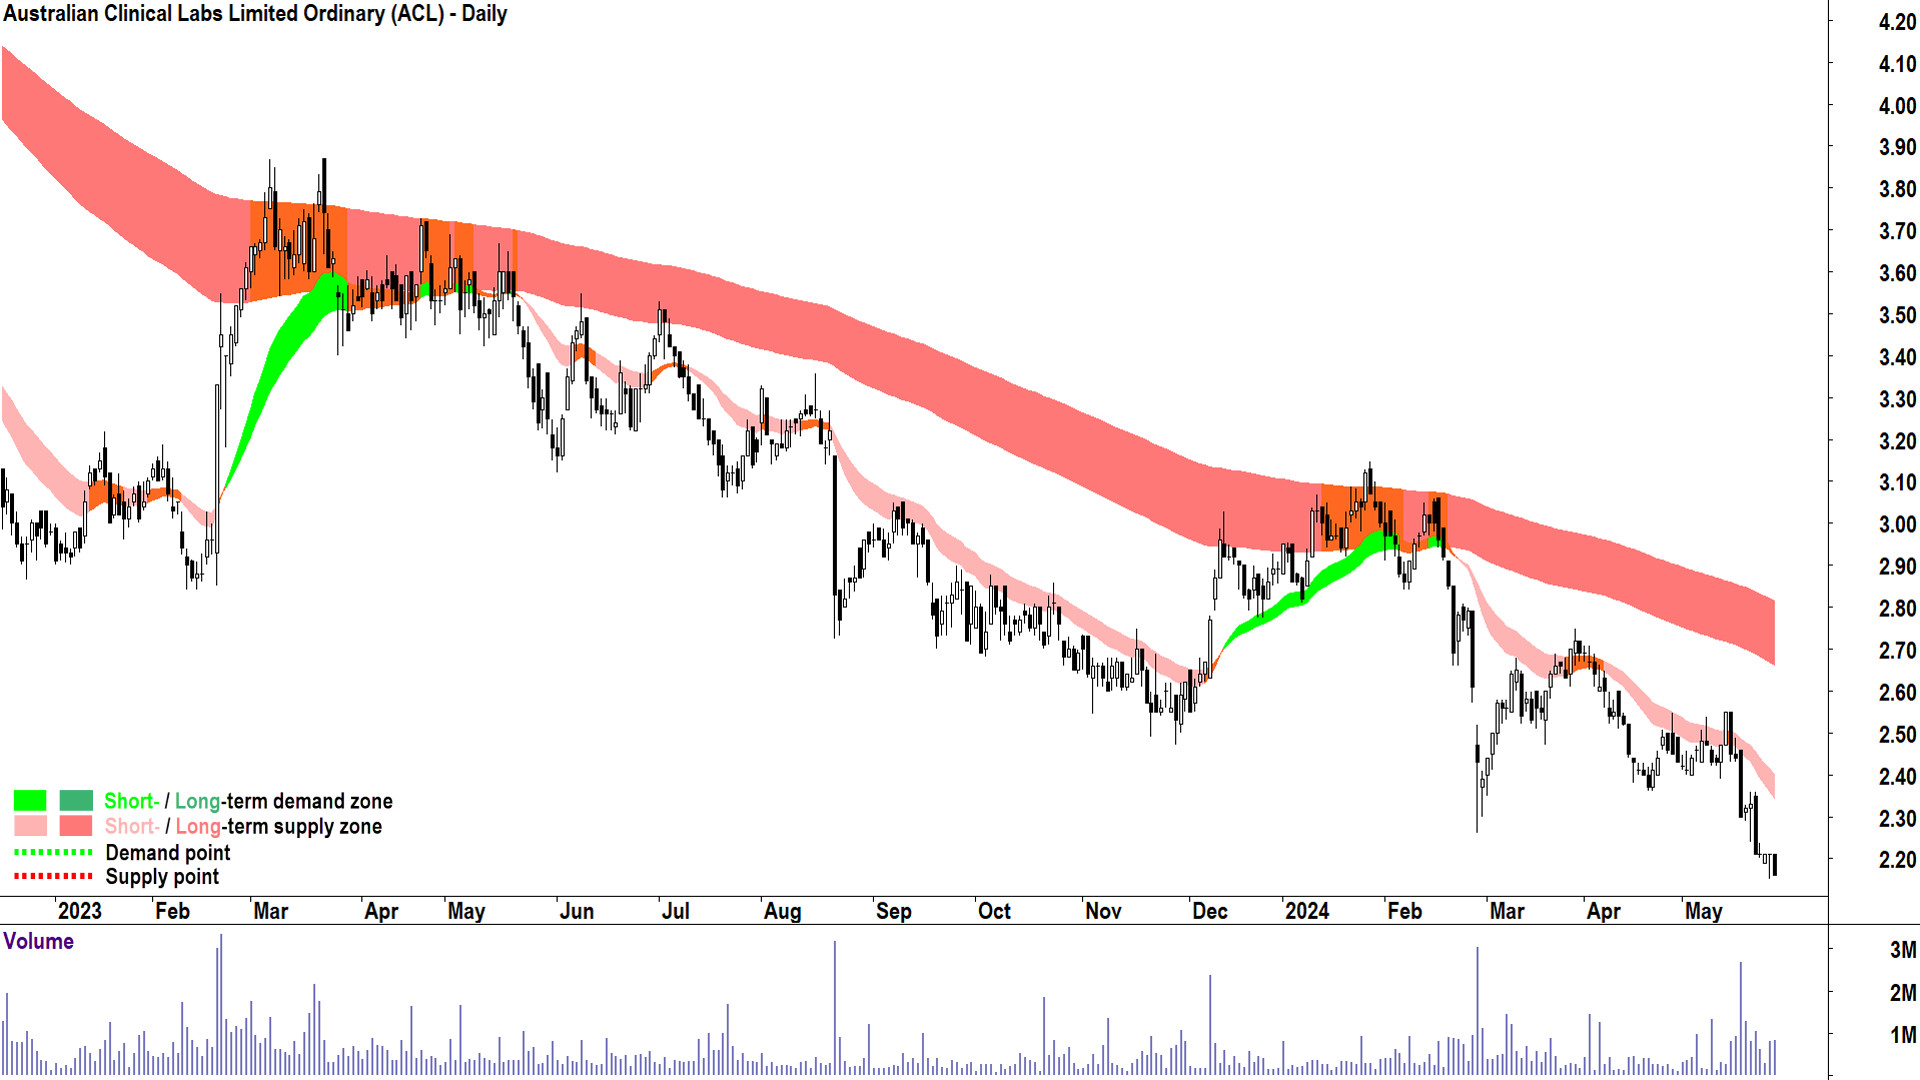 Australian Clinical Labs (ASX-ACL) chart 28 May 2024